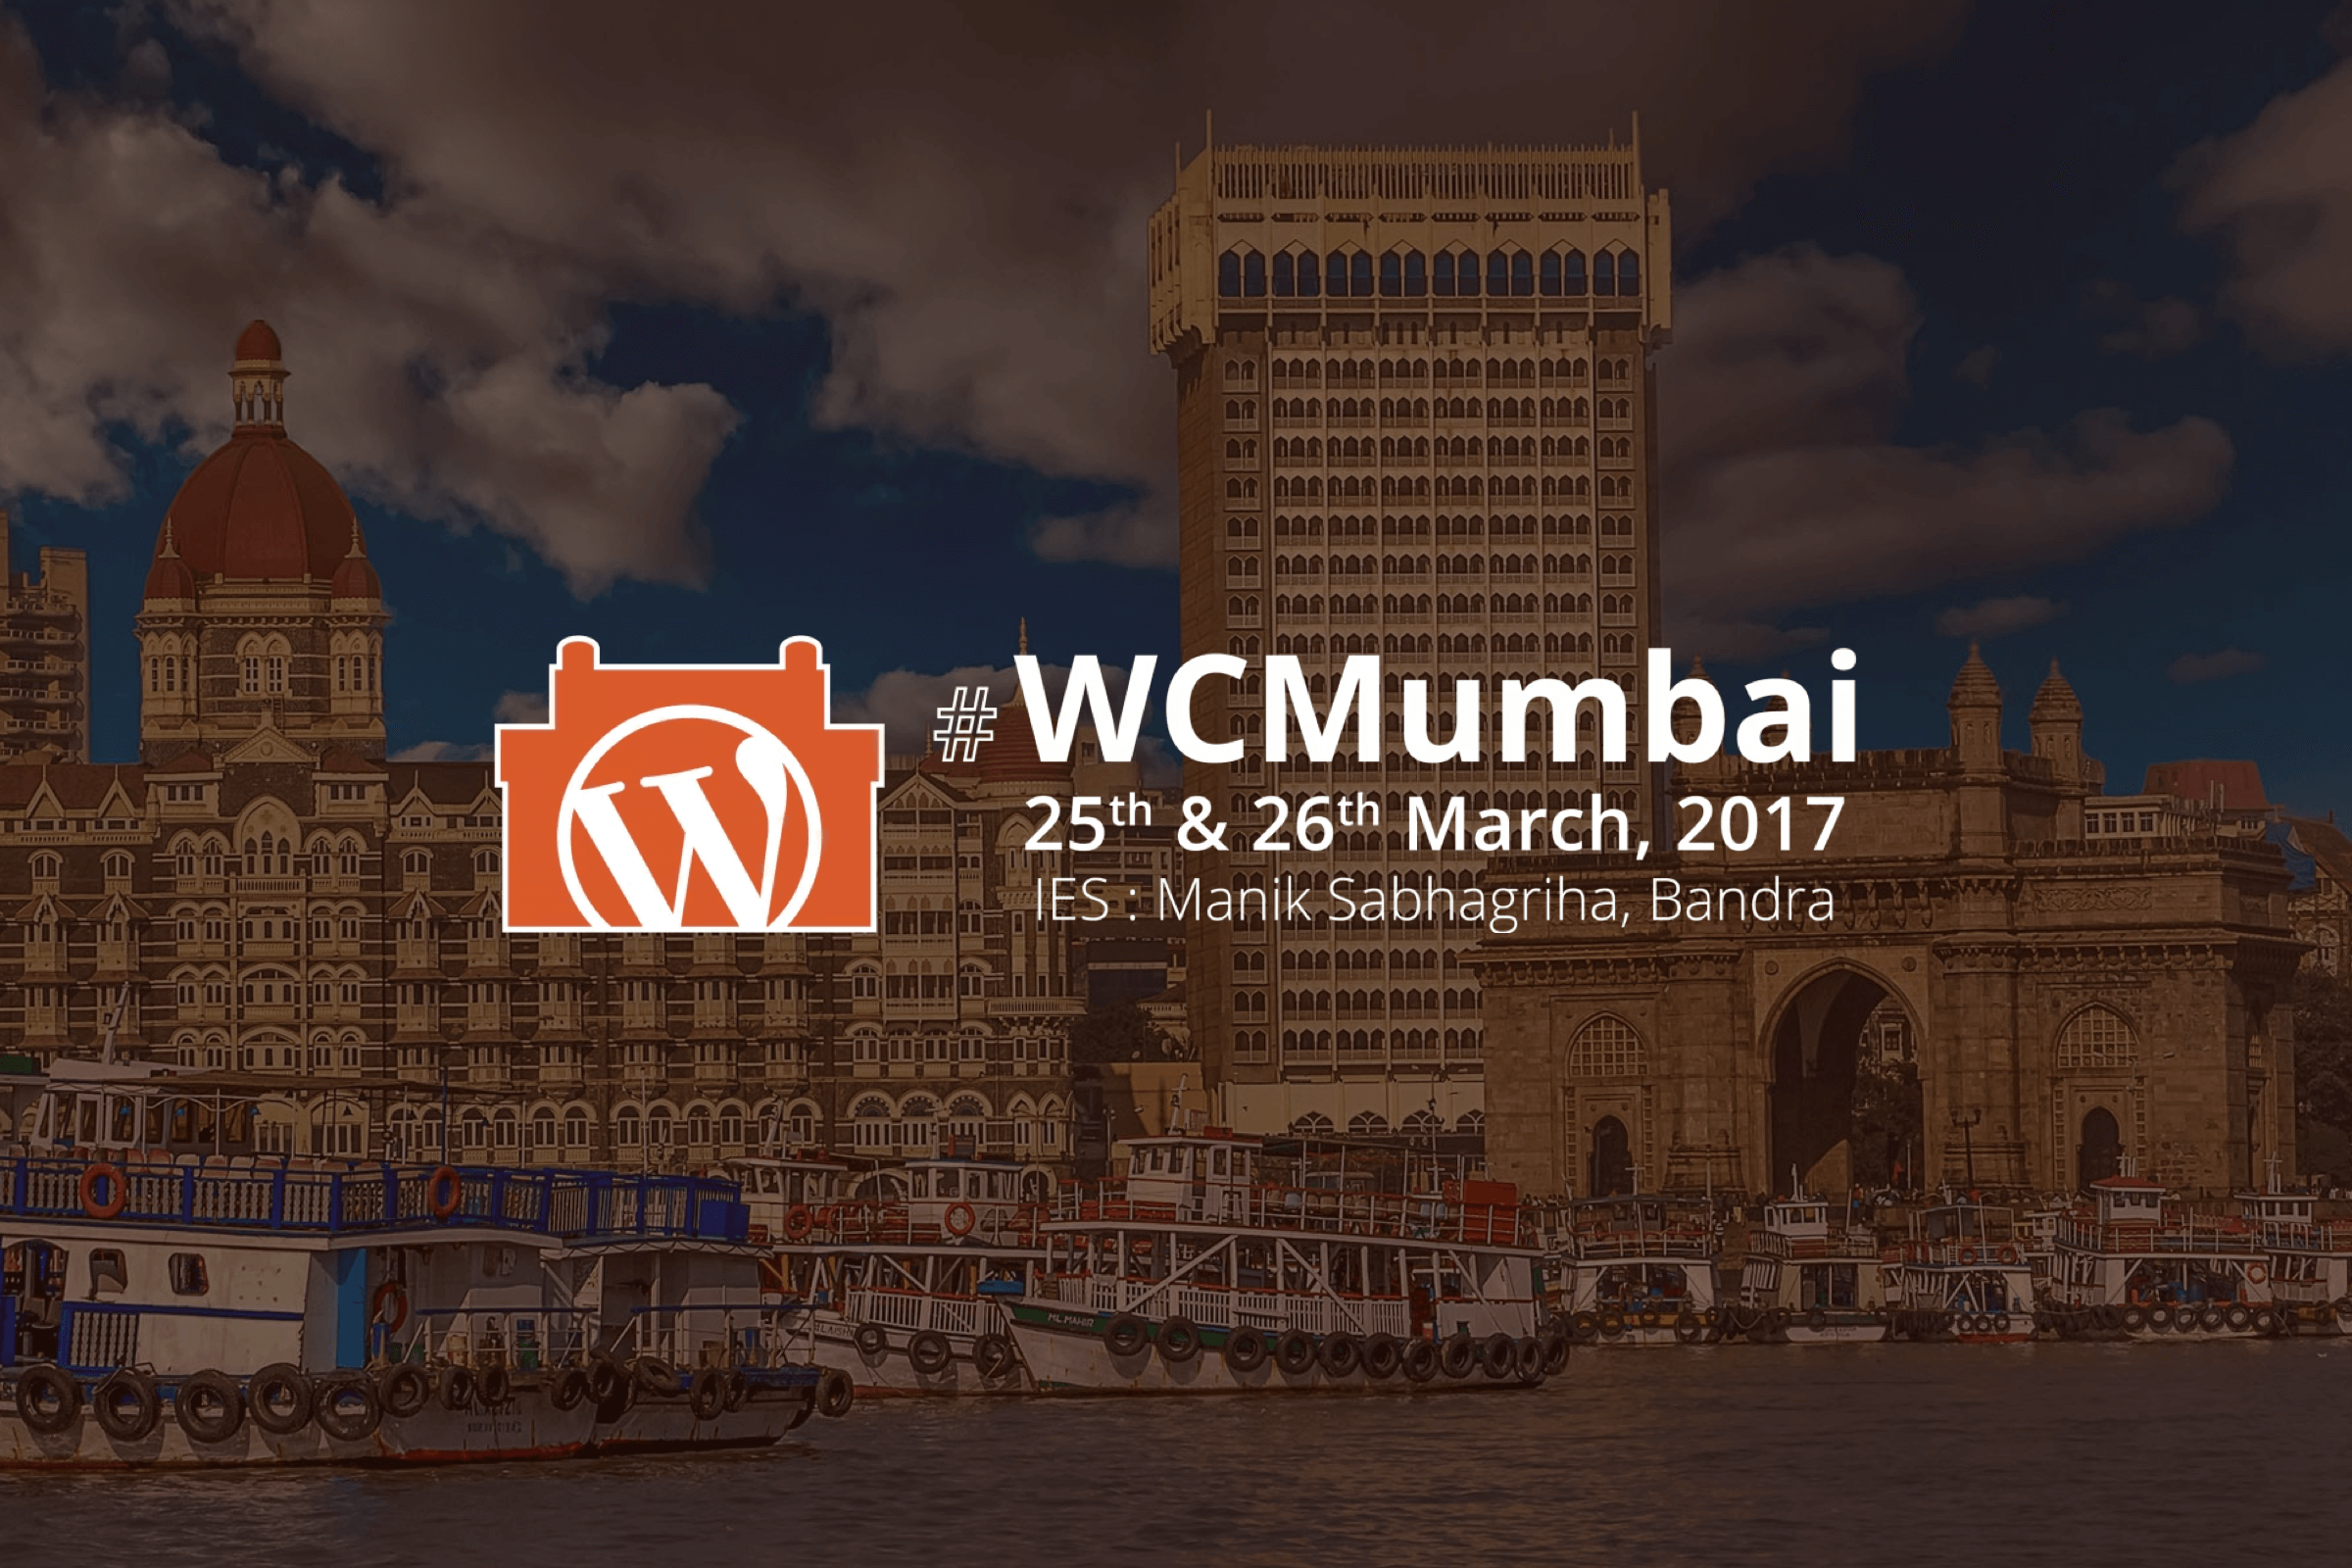 Multidots at WordCamp Mumbai 2017: The City of Dreams taught a lot to Our Team!